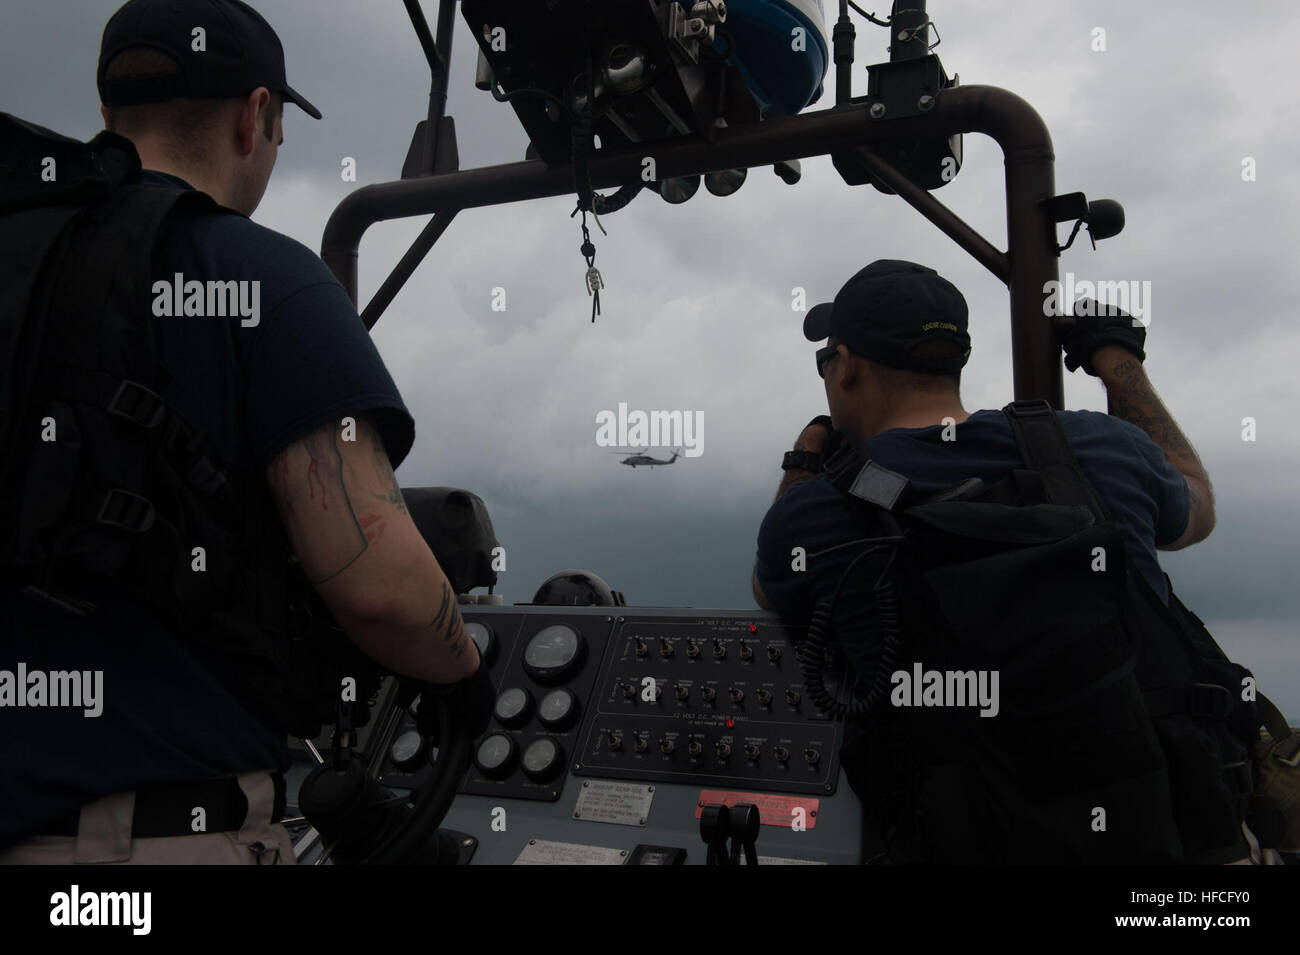 Sailors from littoral combat ship USS Fort Worth (LCS 3) conduct a surface search on a 11-m rigid hull inflatable boat while the ship’s MH-60R Seahawk flies overhead during air search operations. Fort Worth is currently on station in the Java Sea and supporting Indonesian-led efforts to locate missing AirAsia Flight QZ8501. (U.S. Navy photo by Mass Communication Specialist MC2 Antonio P. Turretto Ramos/Released) Navy divers support AirAsia Flight QZ8501 search efforts 150104-N-DC018-300 Stock Photo